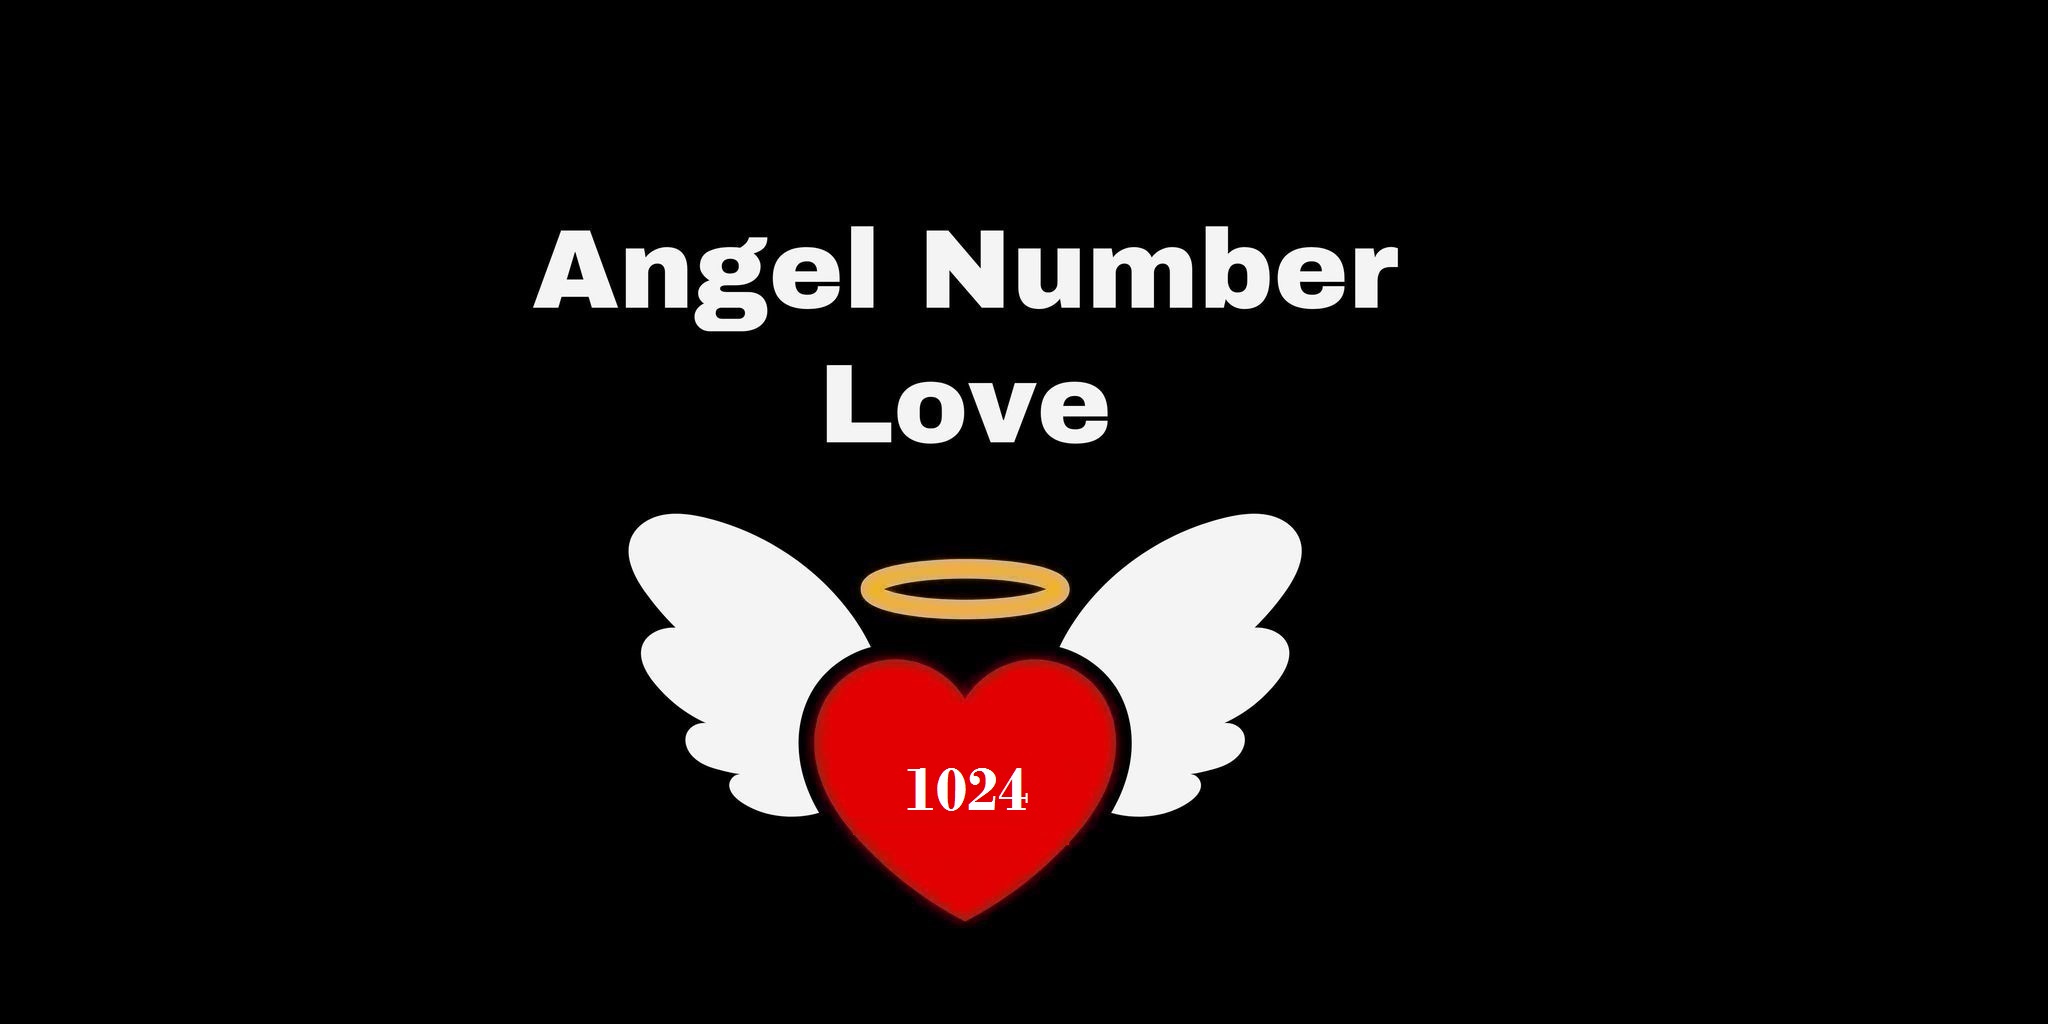 1024 Angel Number Meaning In Love